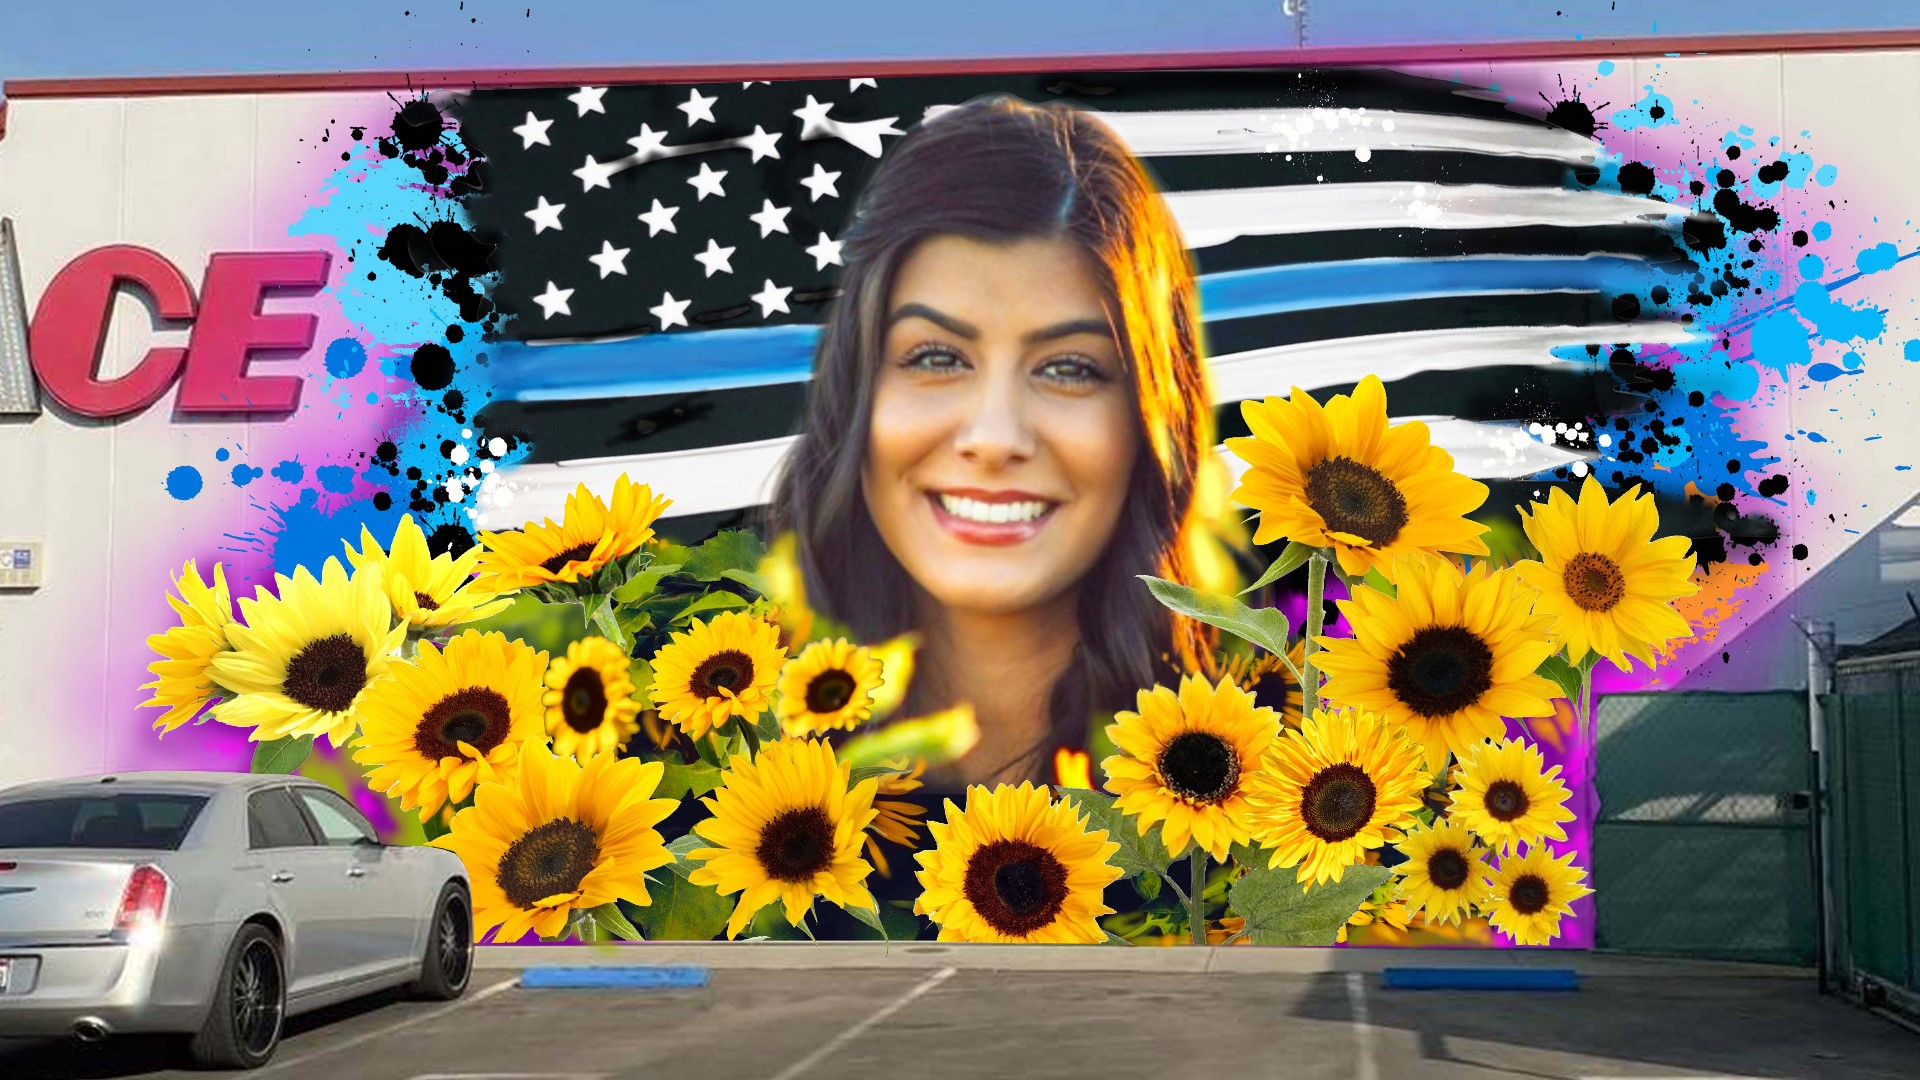 Shane Grammer, known recently for his murals during the Camp Fire, will create this concept to honor Officer Natalie Corona.